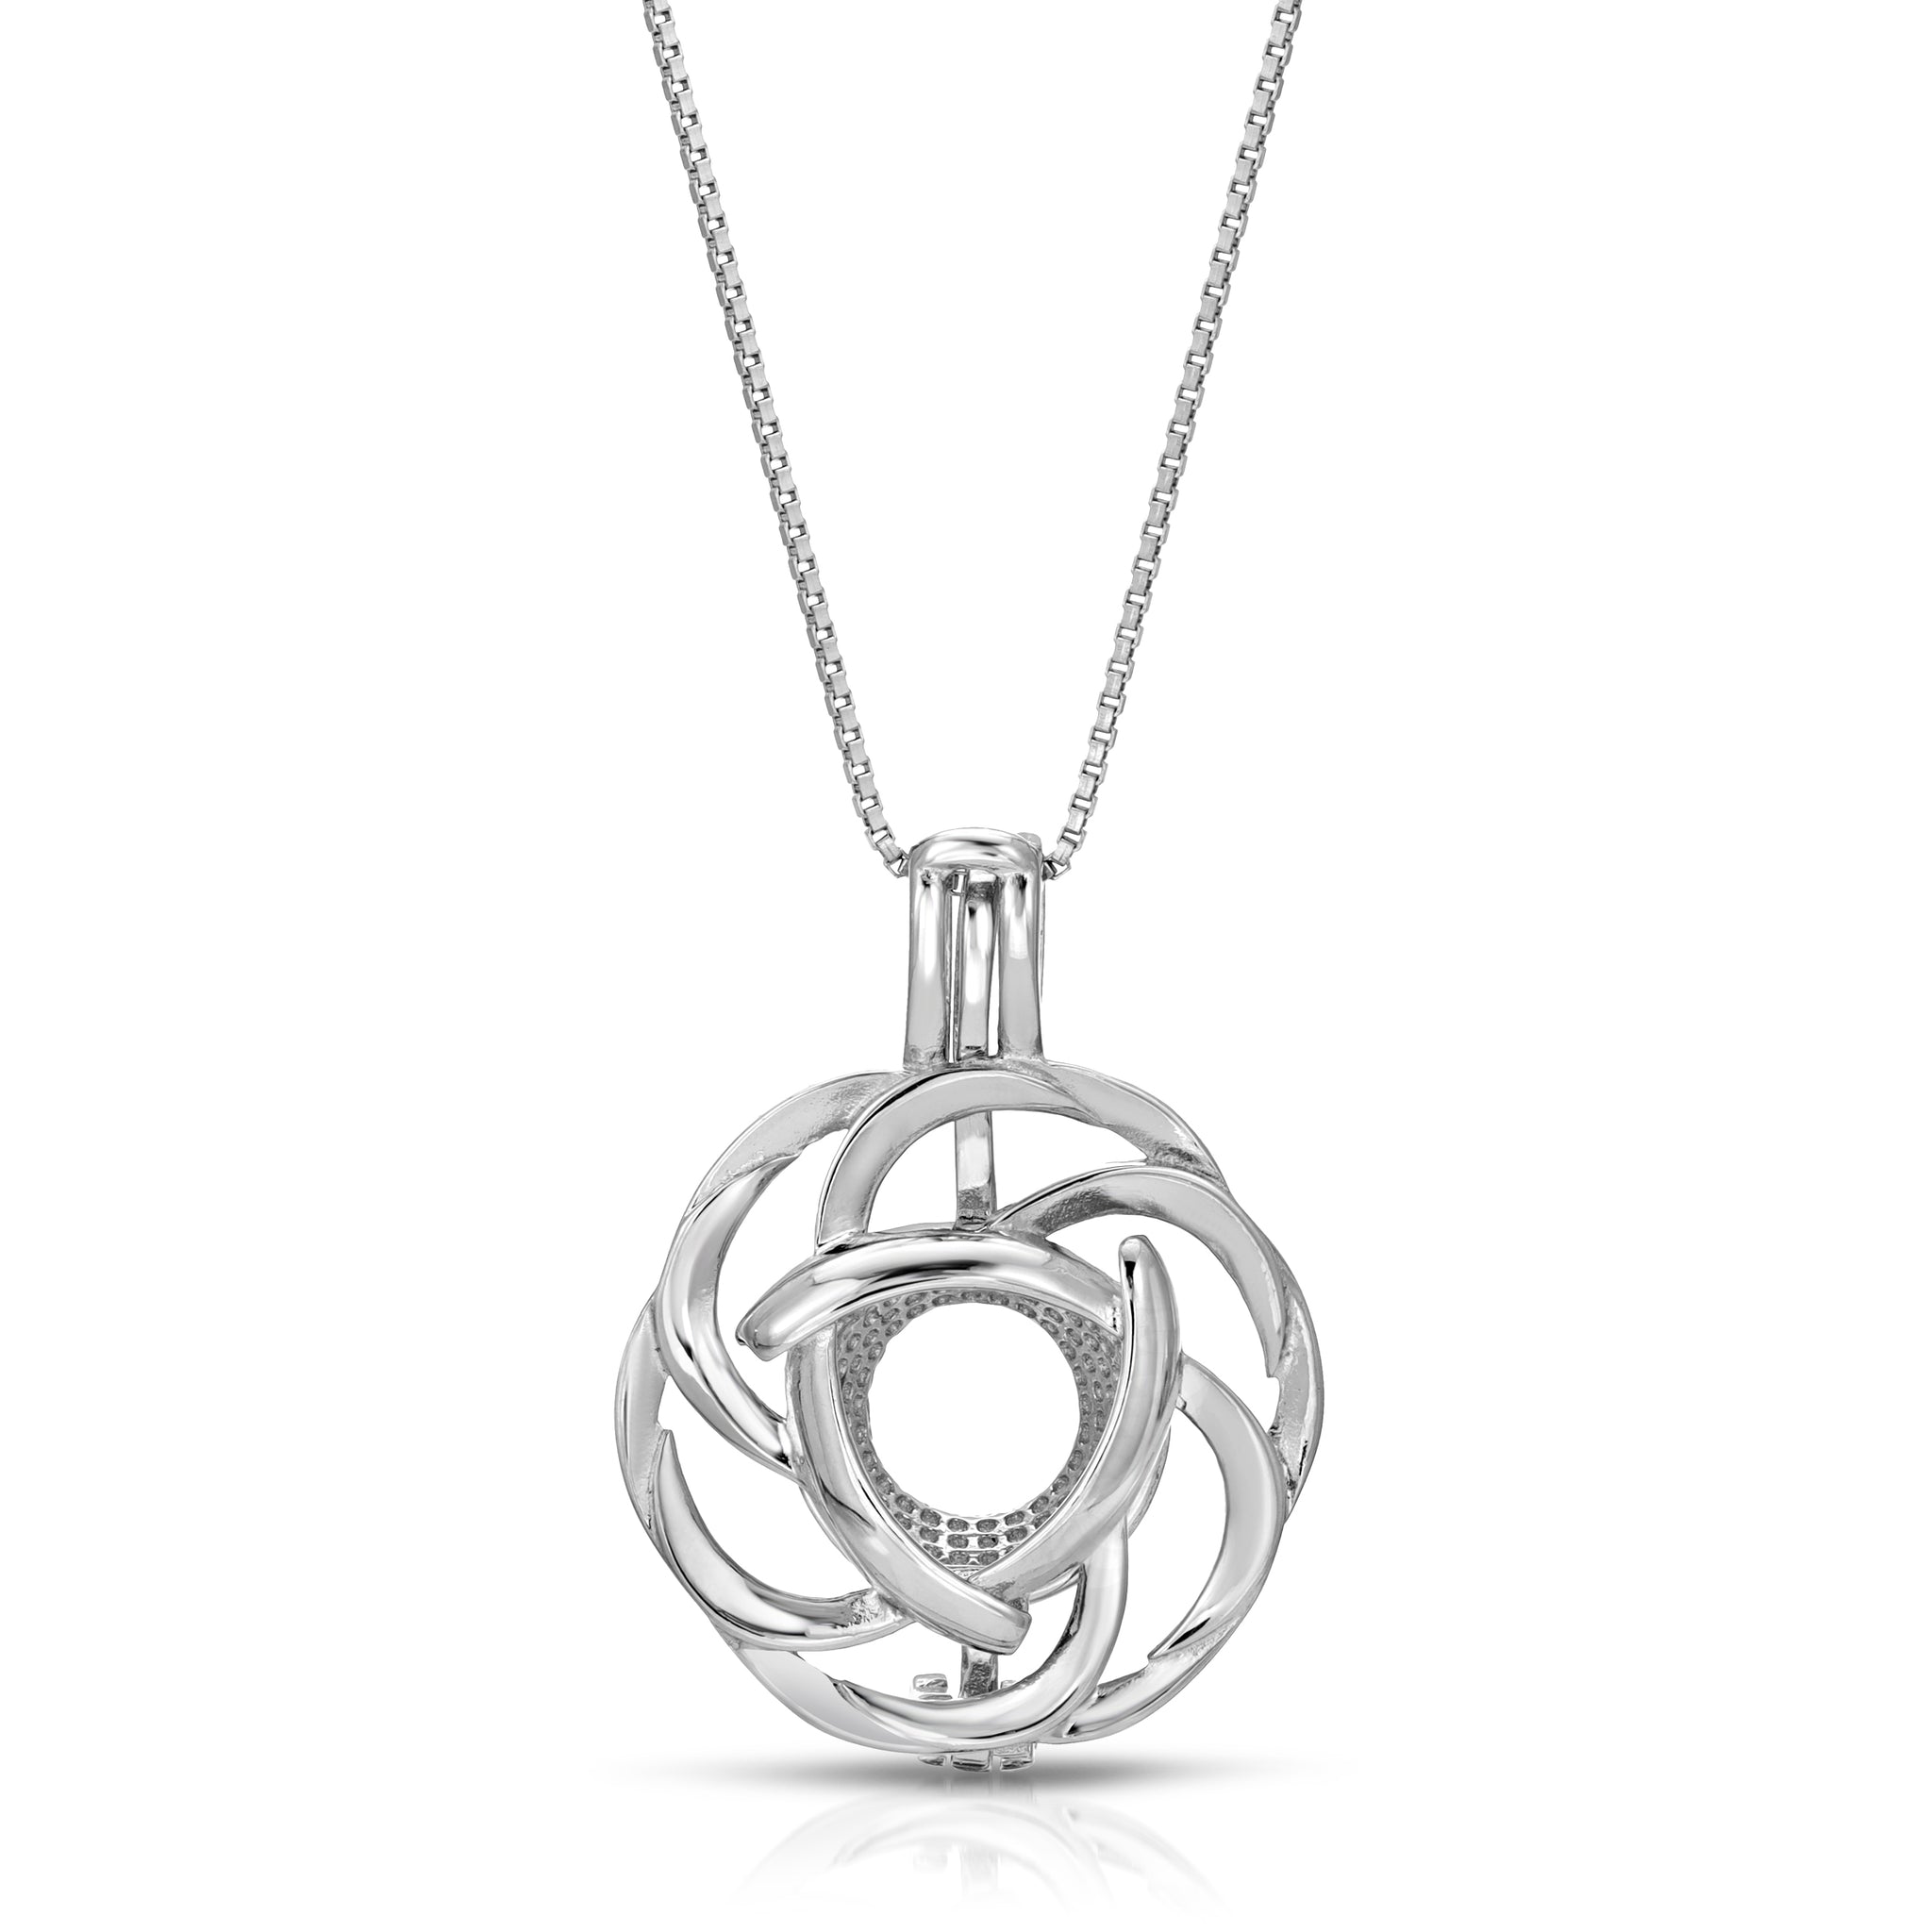 Sterling Silver Pearl Cage Pendant Setting - Flower Design Pearl Cage Pendant Setting Box / 18 in.